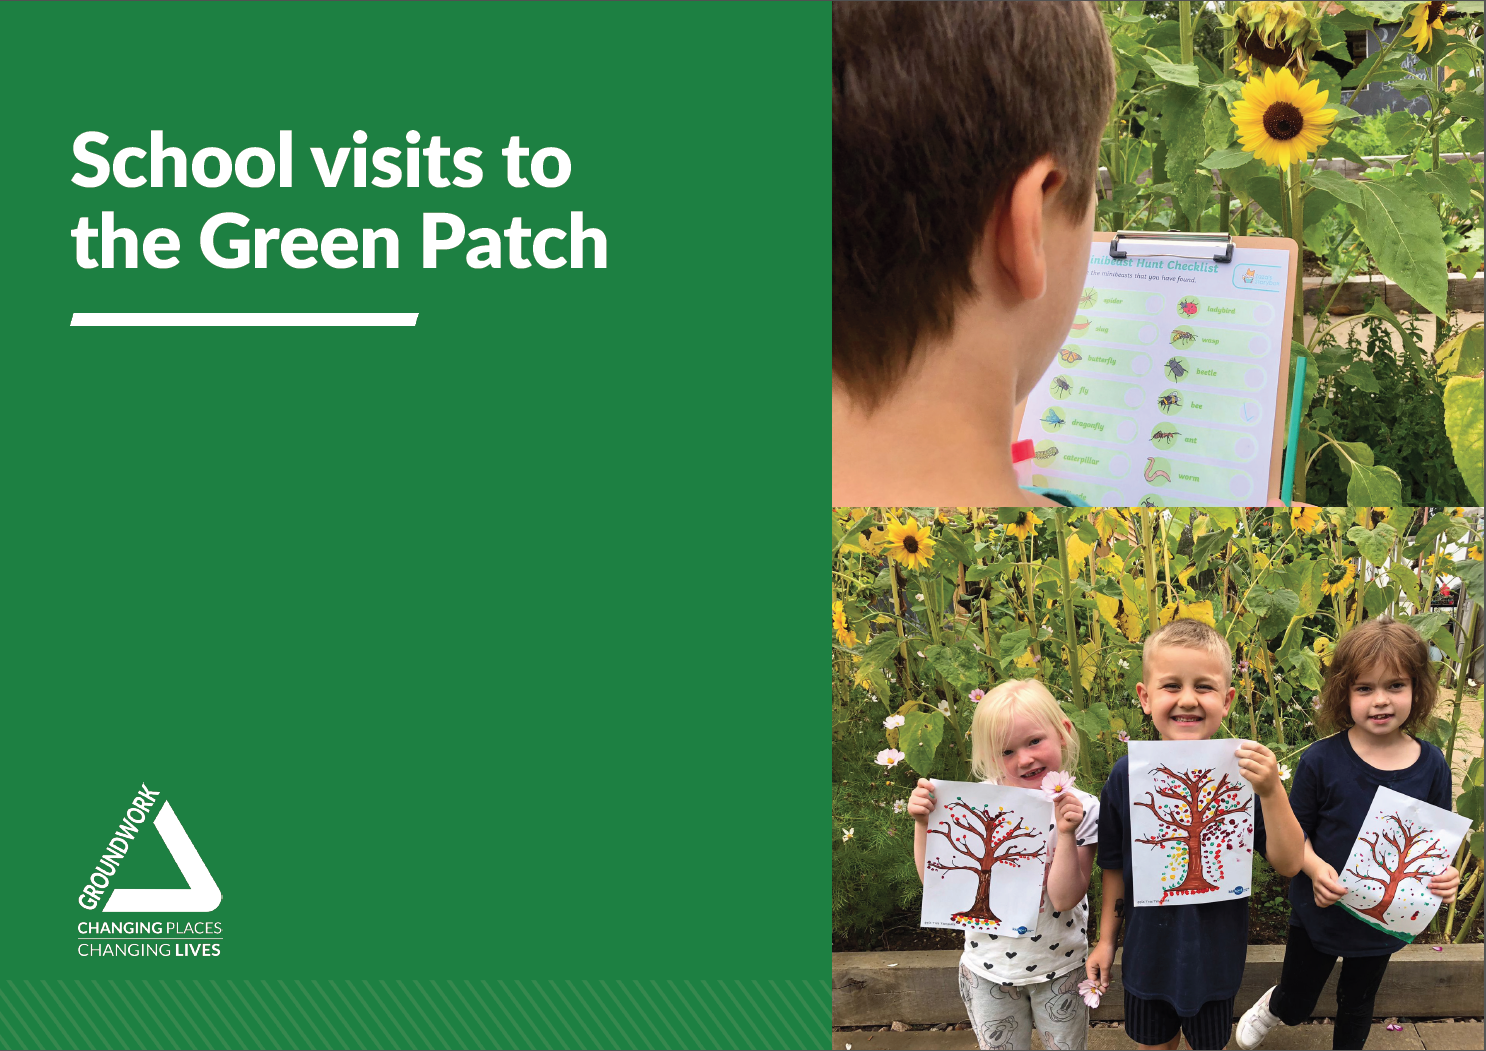 School visits to the Green Patch